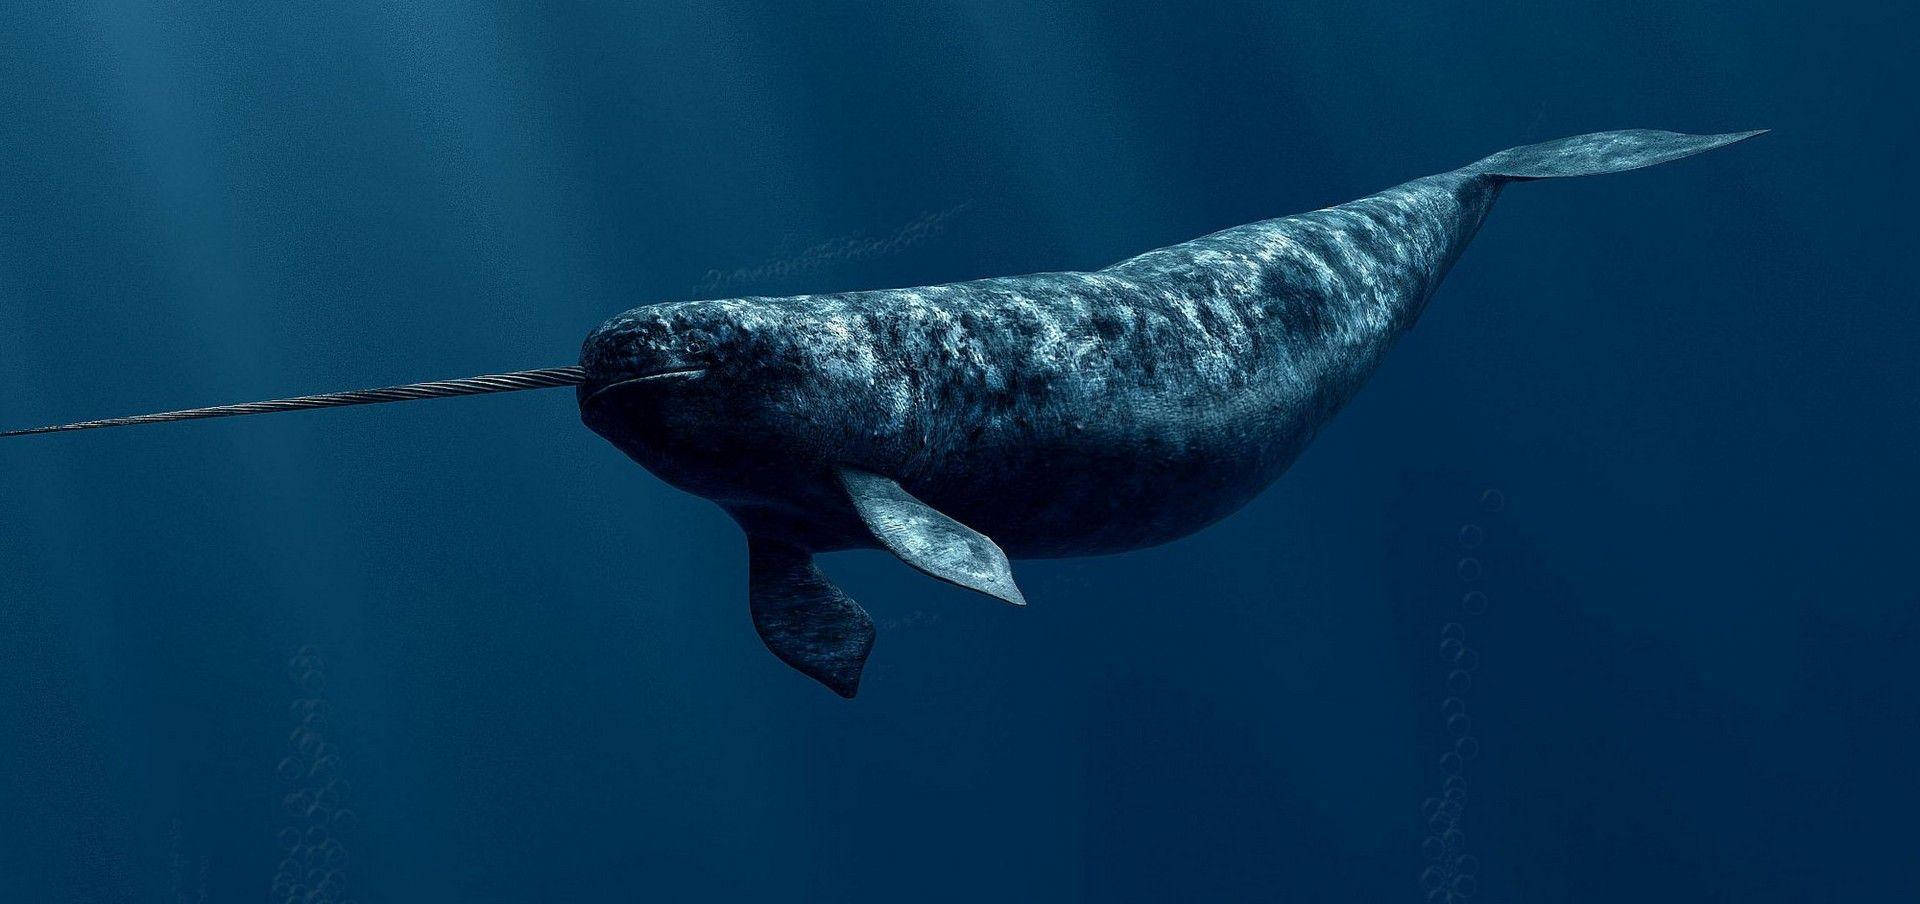 Adult Narwhal Swimming